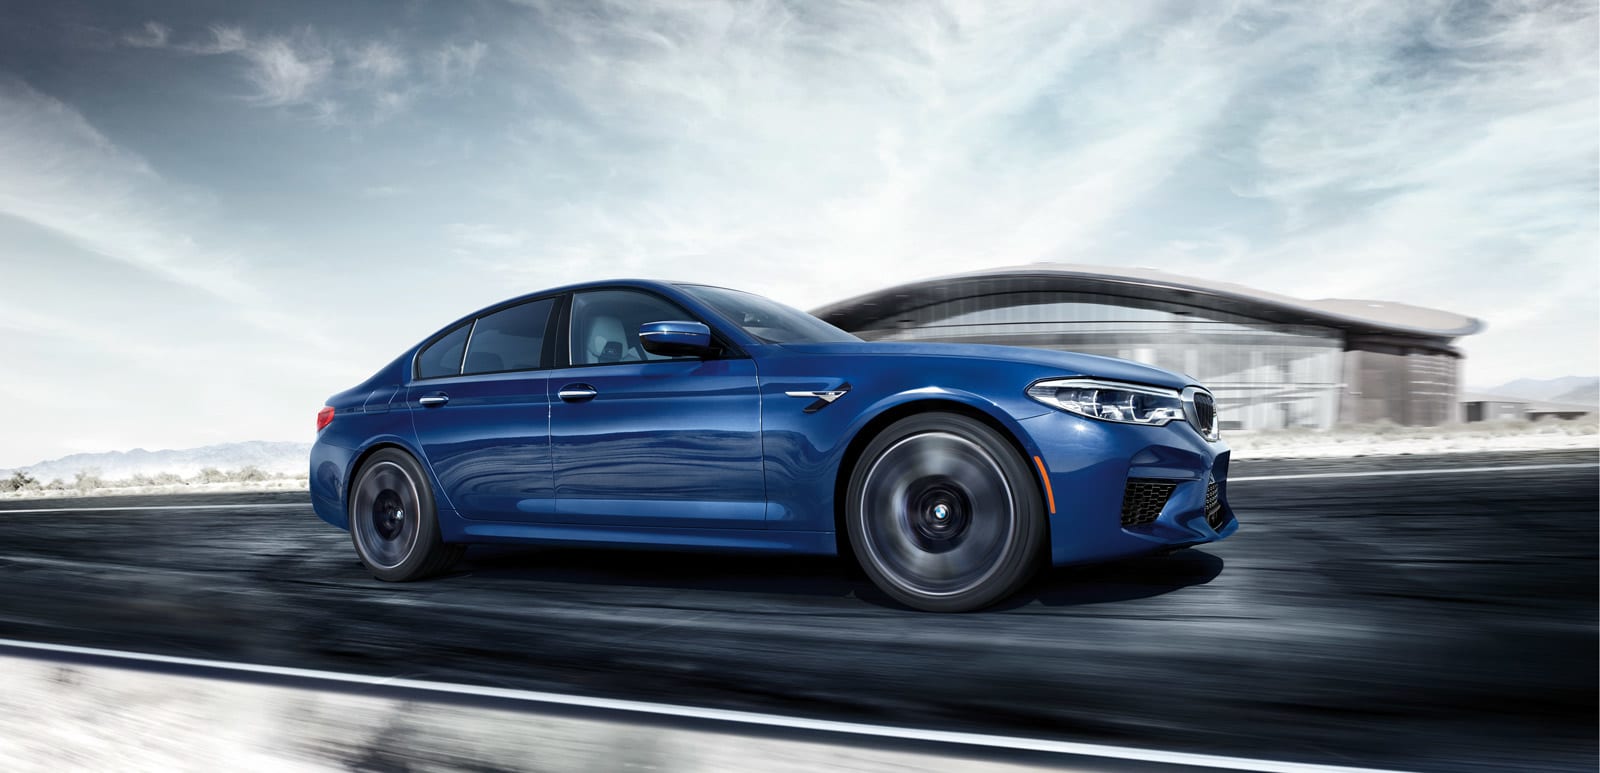 Performance of the 2018 BMW M5 